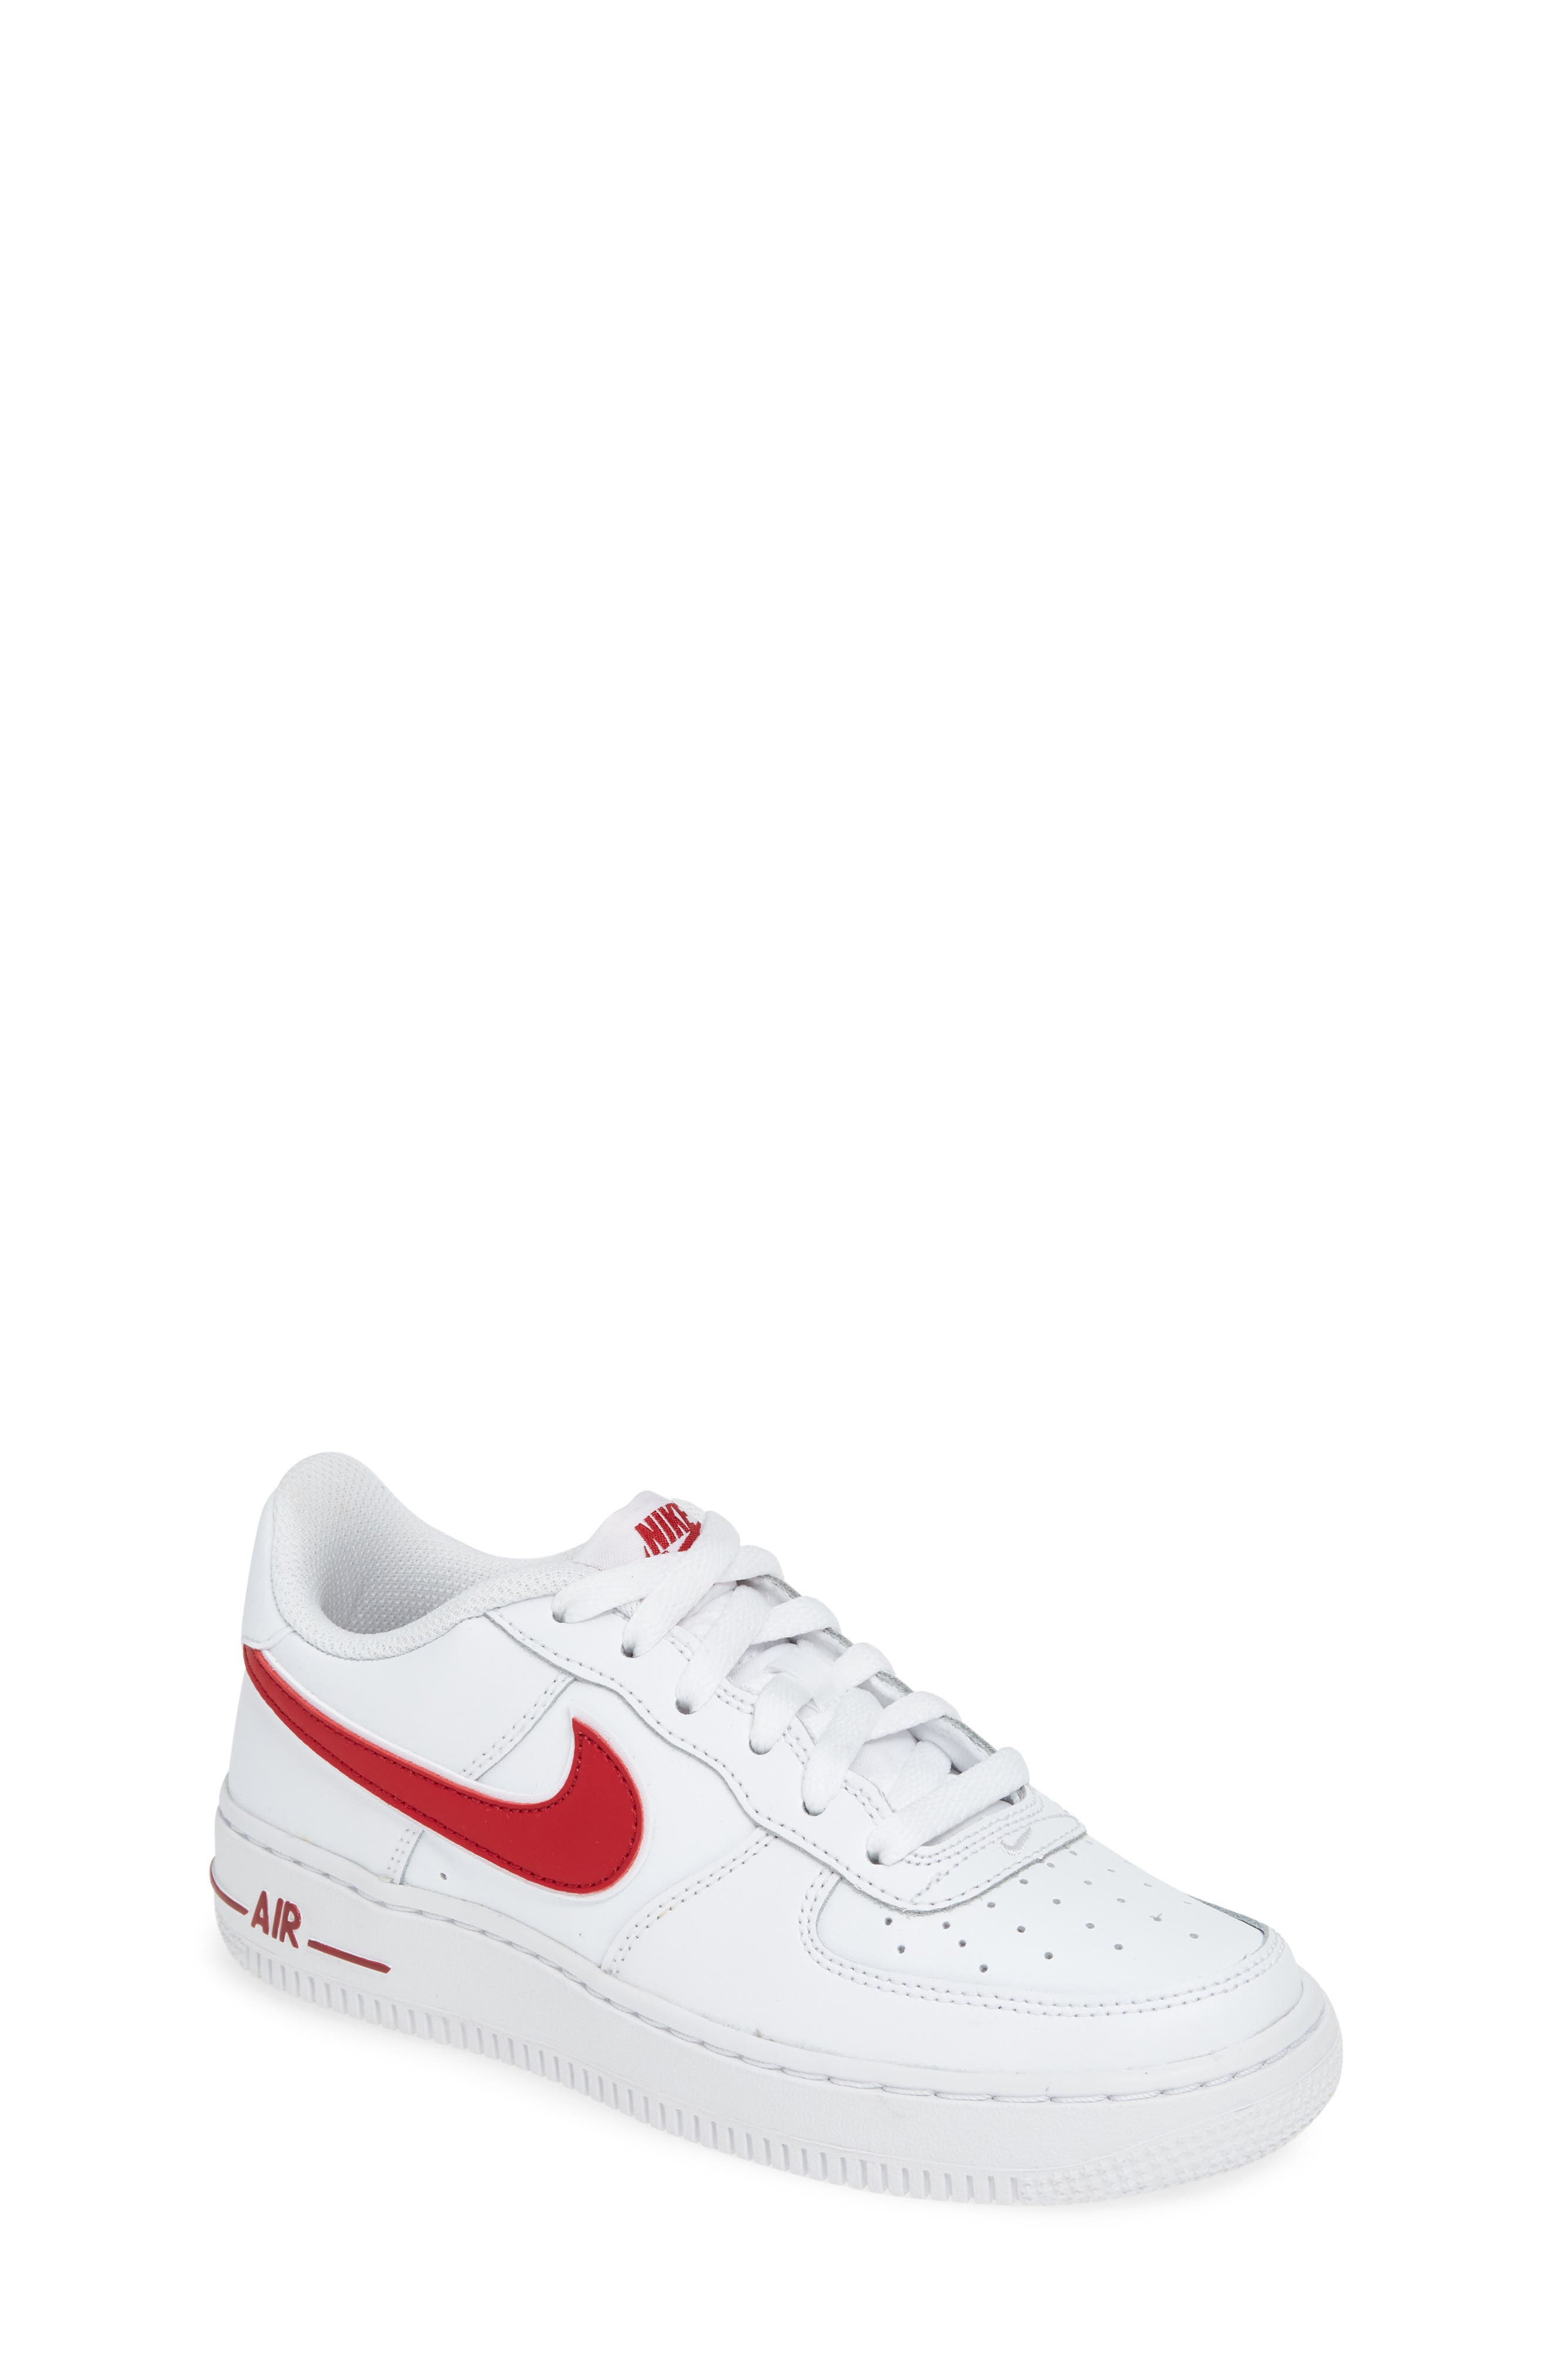 white and red air force 1 kids